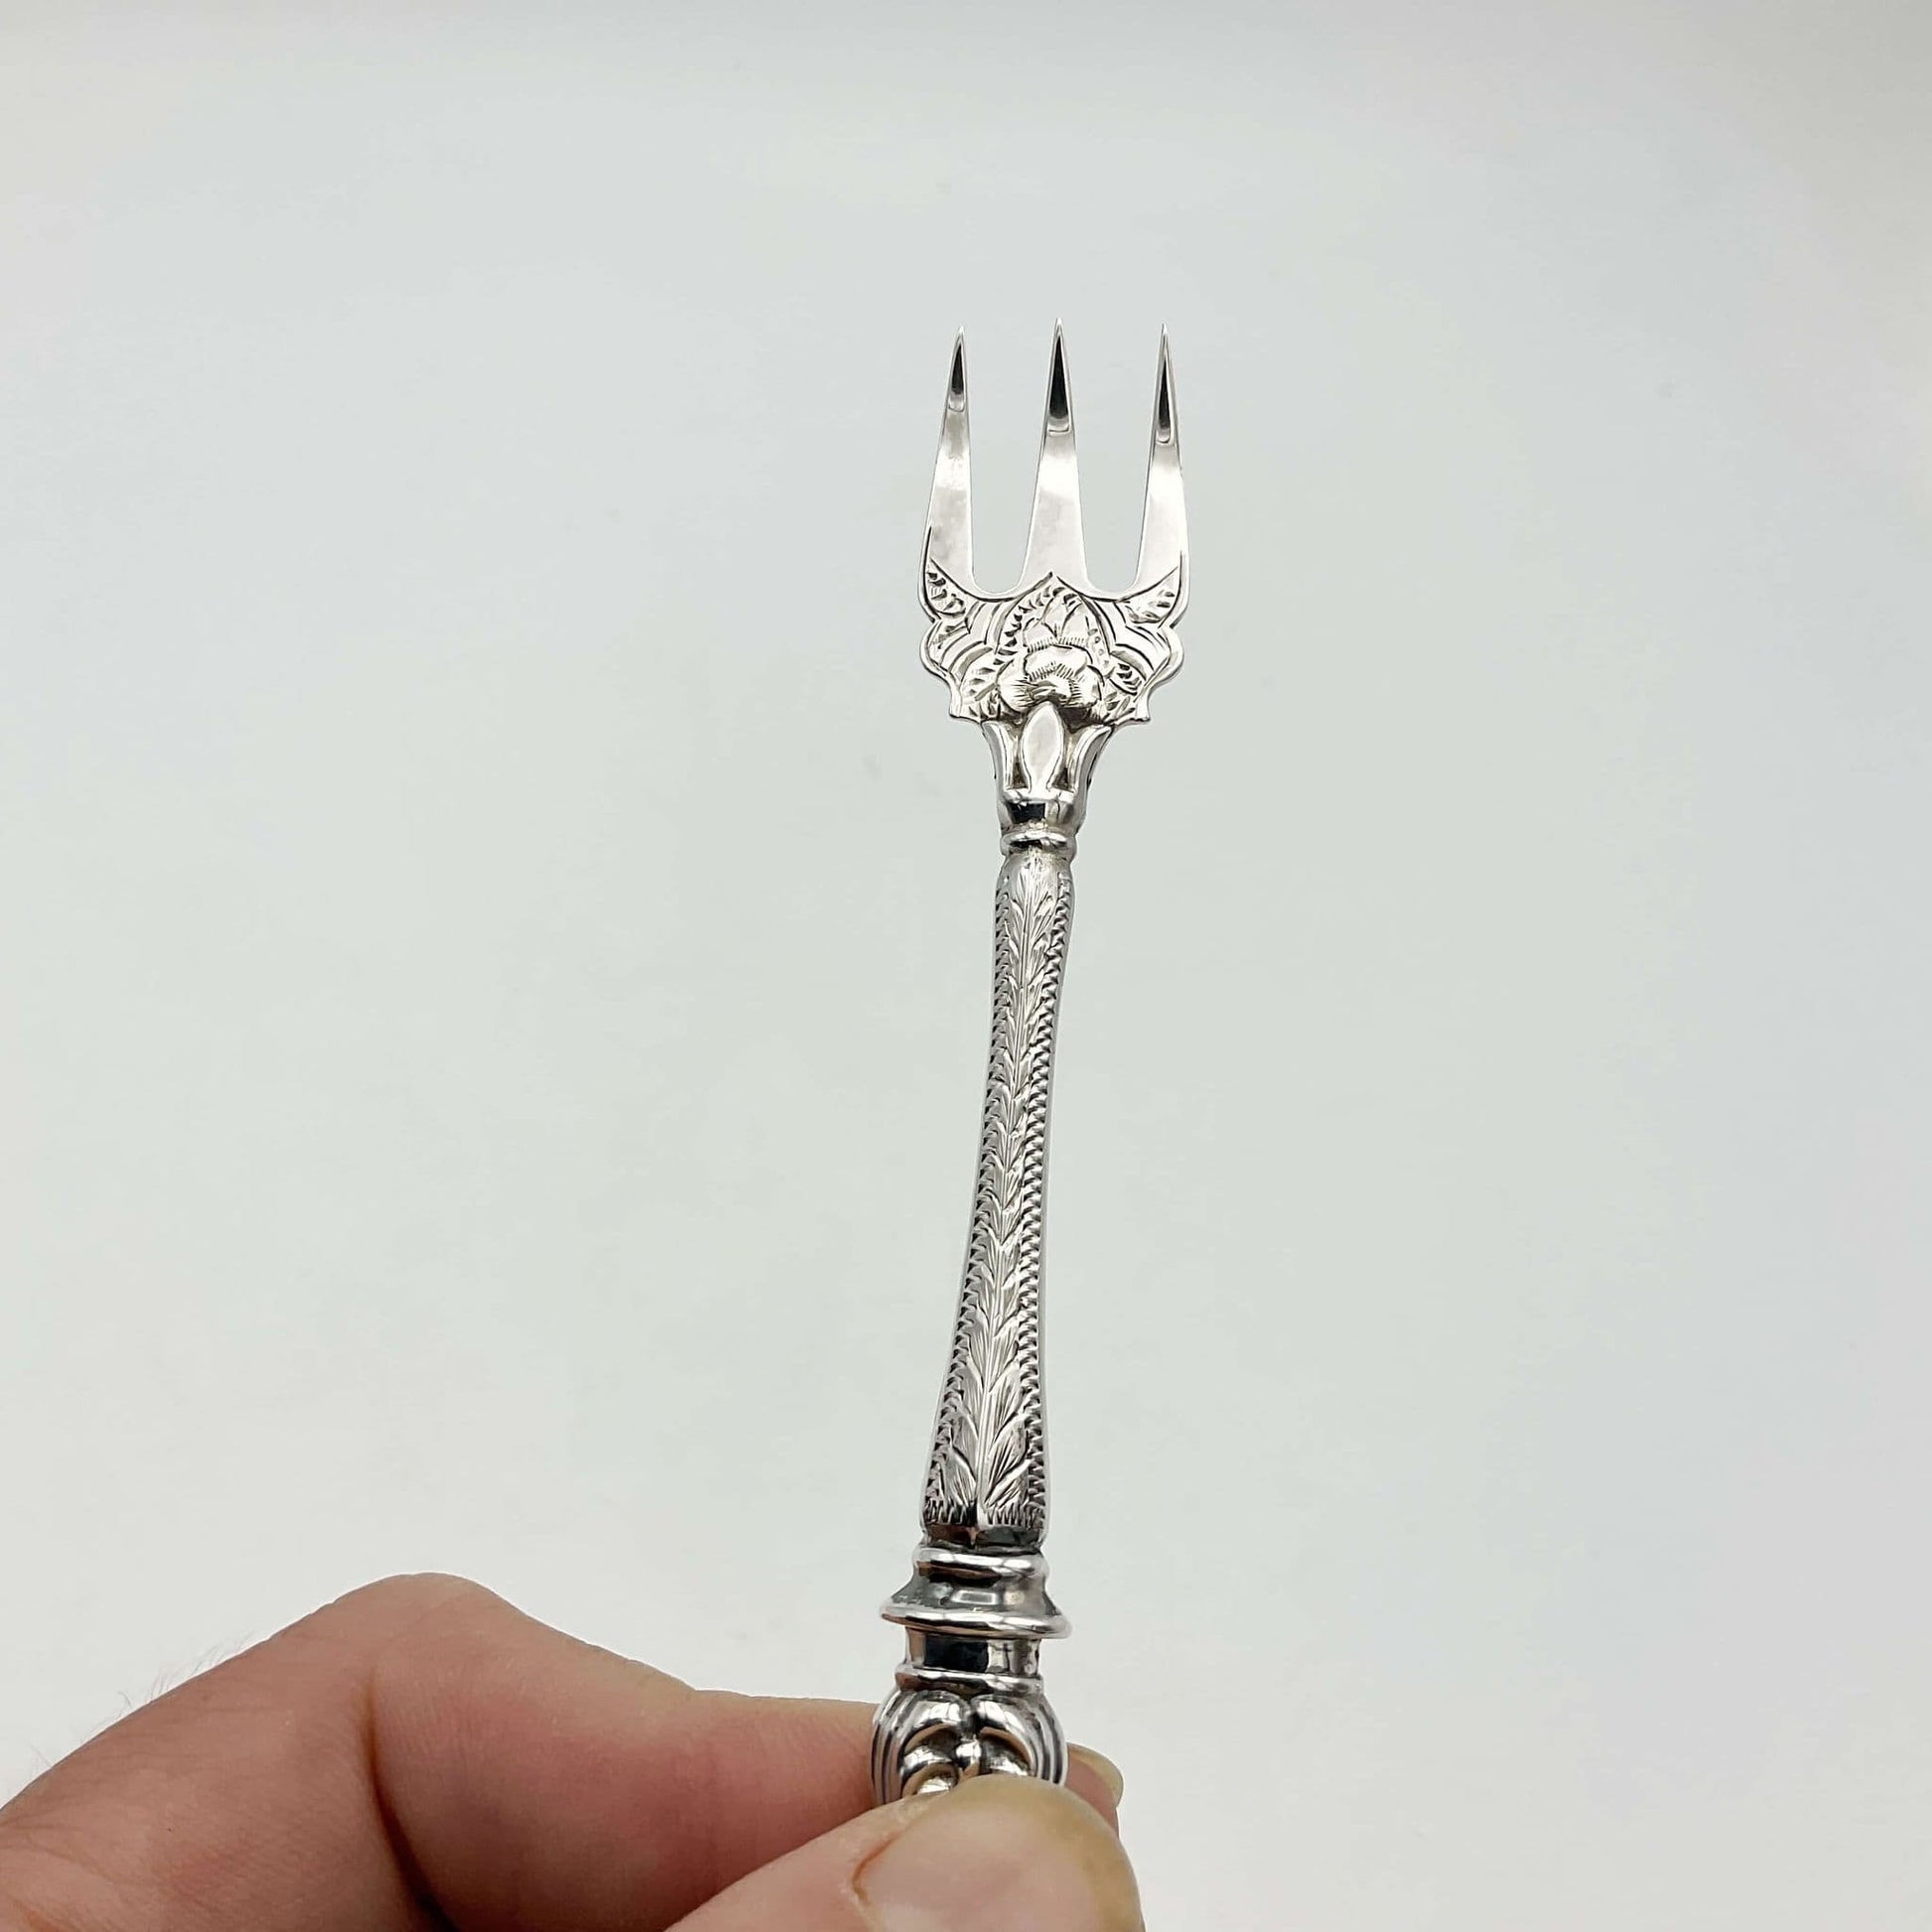 Stunning detailing to the neck and prongs of fork